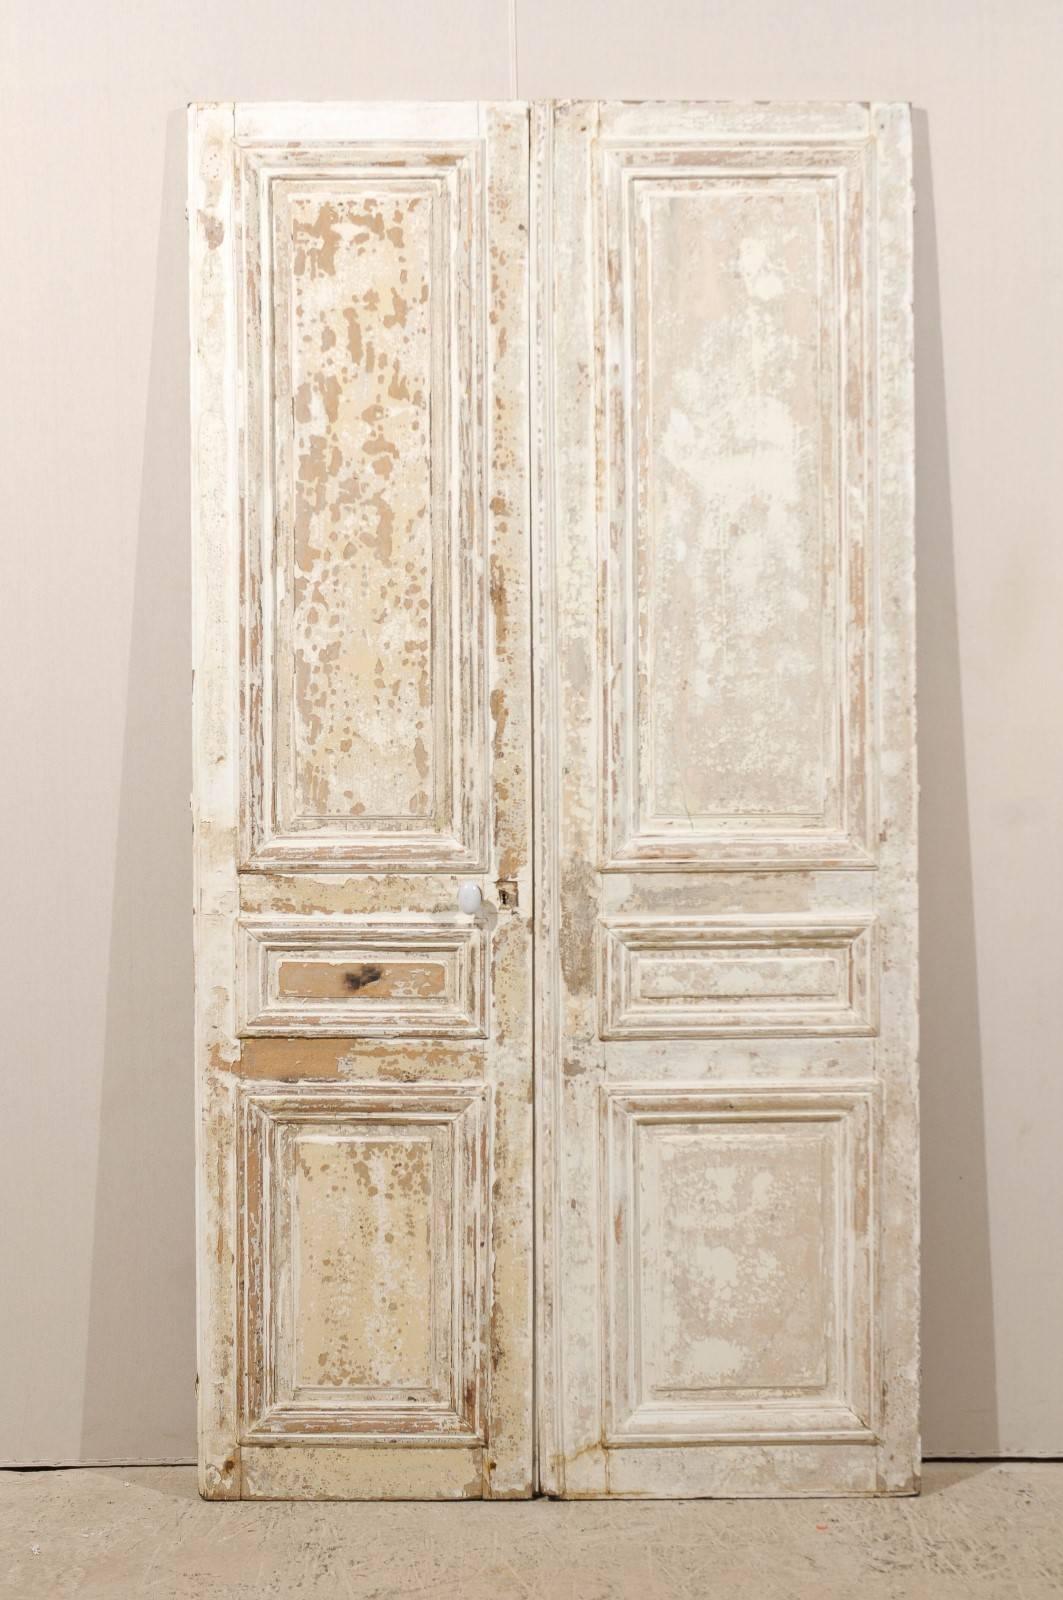 Painted Pair of Aged Tall French Doors with Nice Old Hardware from the Mid-19th Century